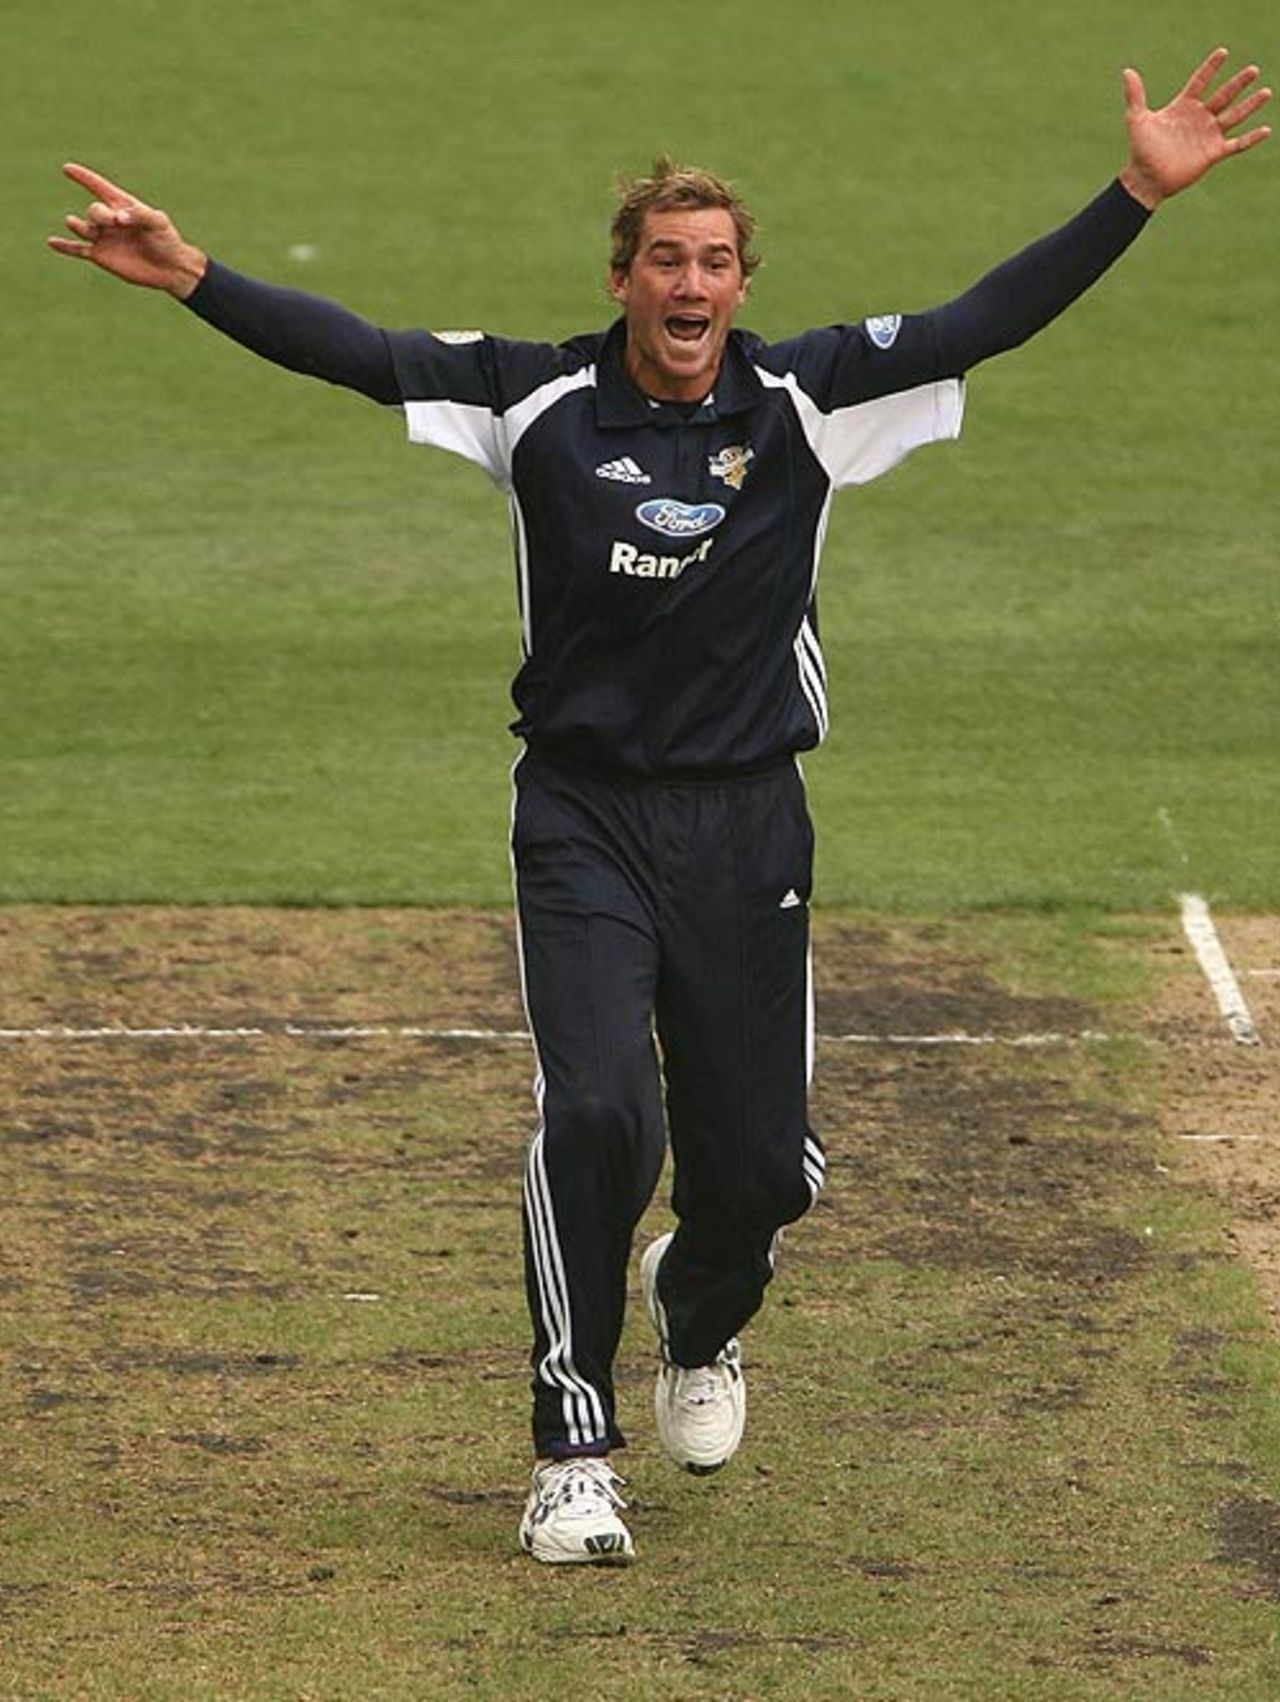 John Hastings celebrates a wicket, Victoria v New South Wales, FR Cup, Melbourne, November 28, 2007